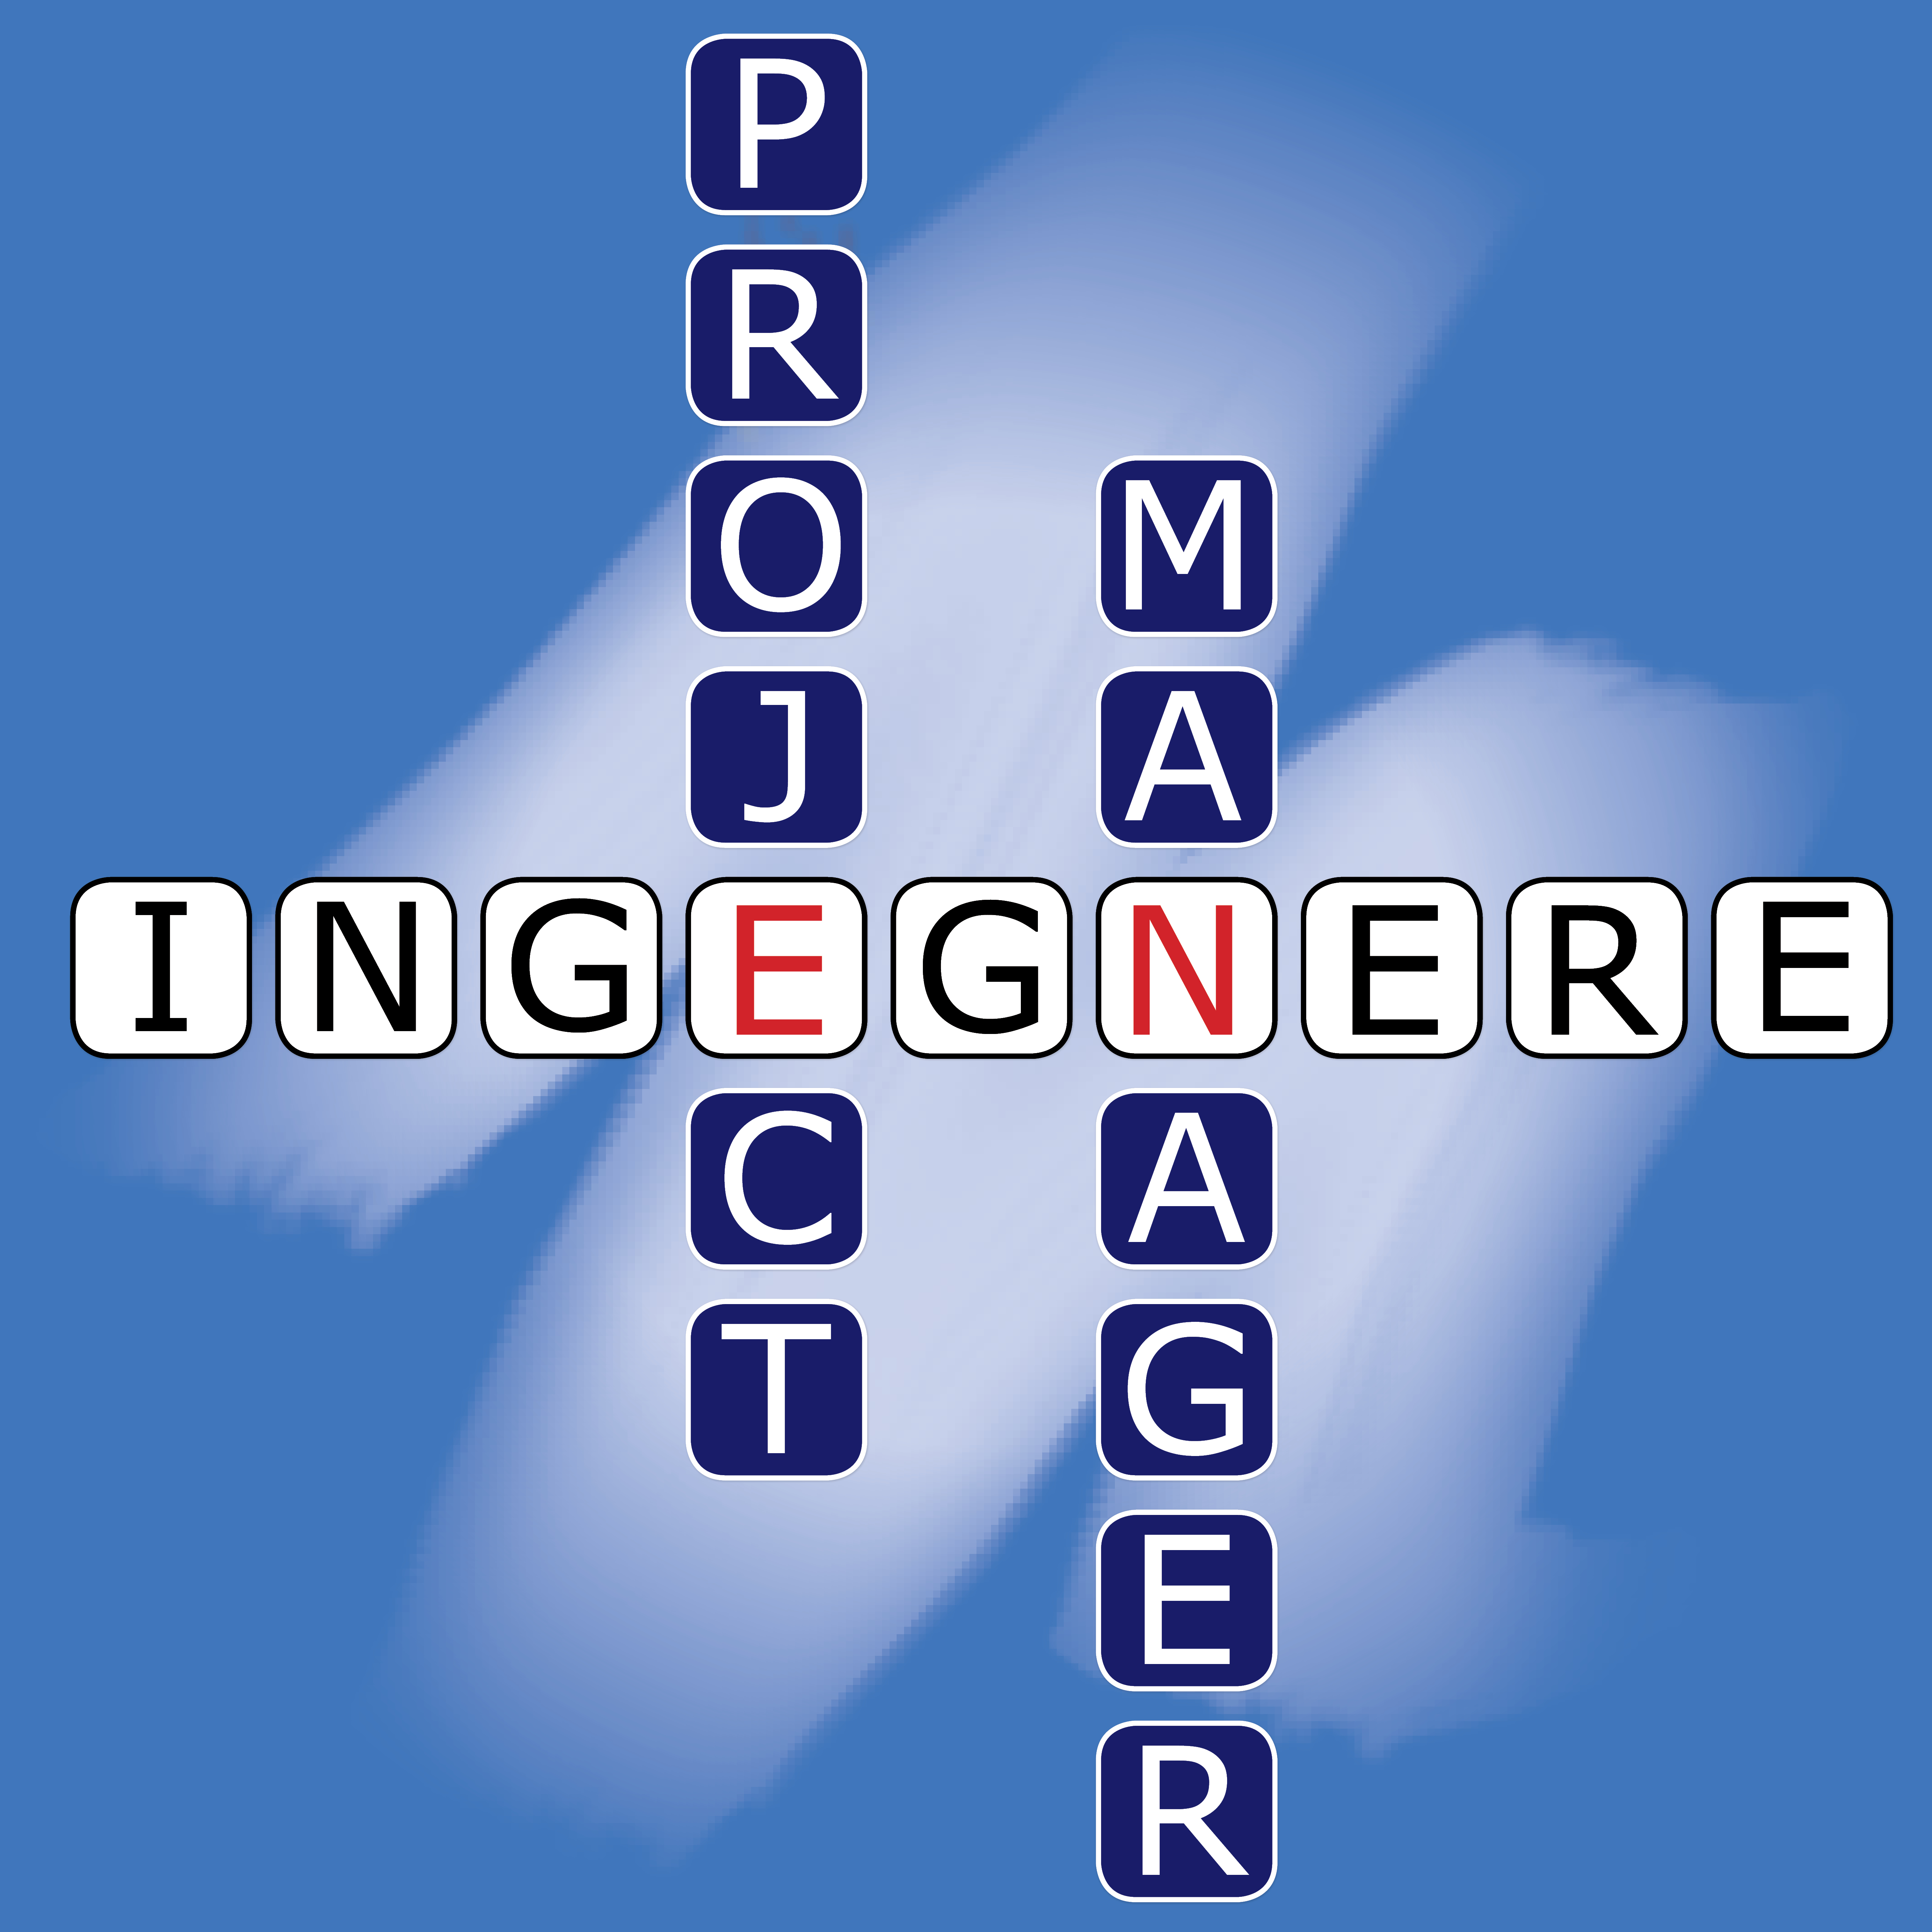 Ingegnere o project manager, questo è il dilemma